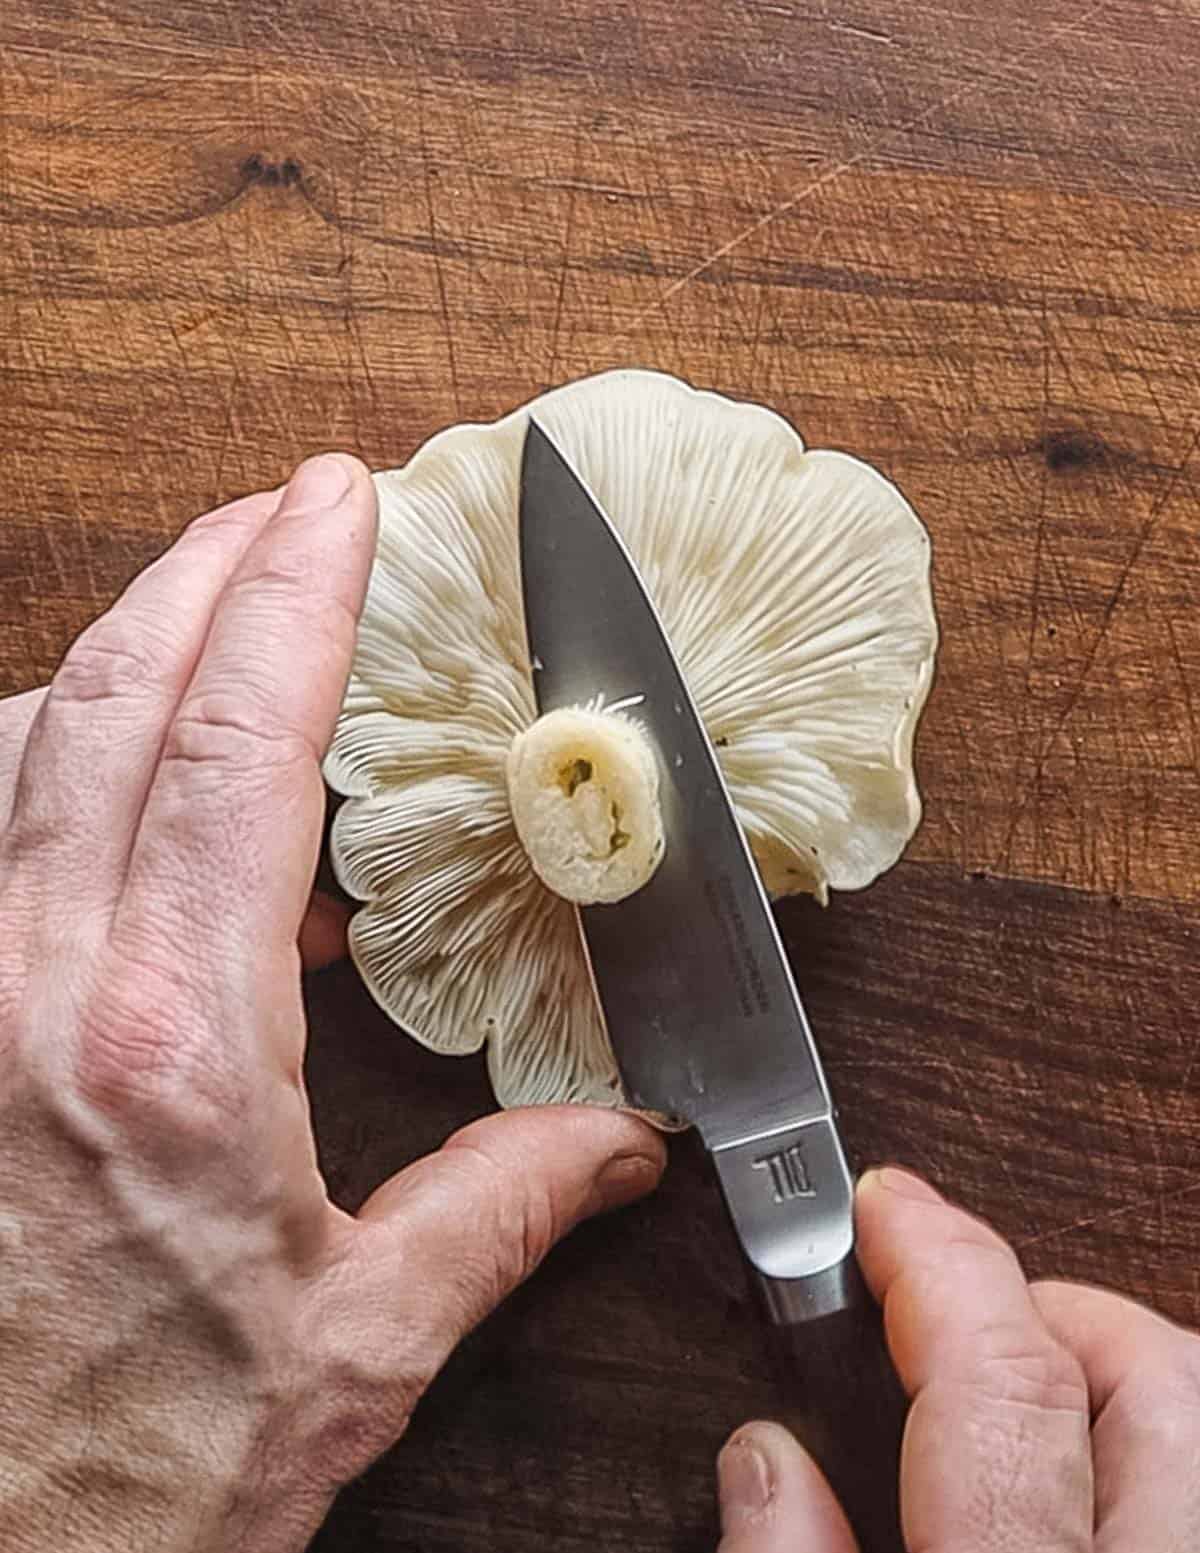 Removing the stem from an elm oyster mushroom. 